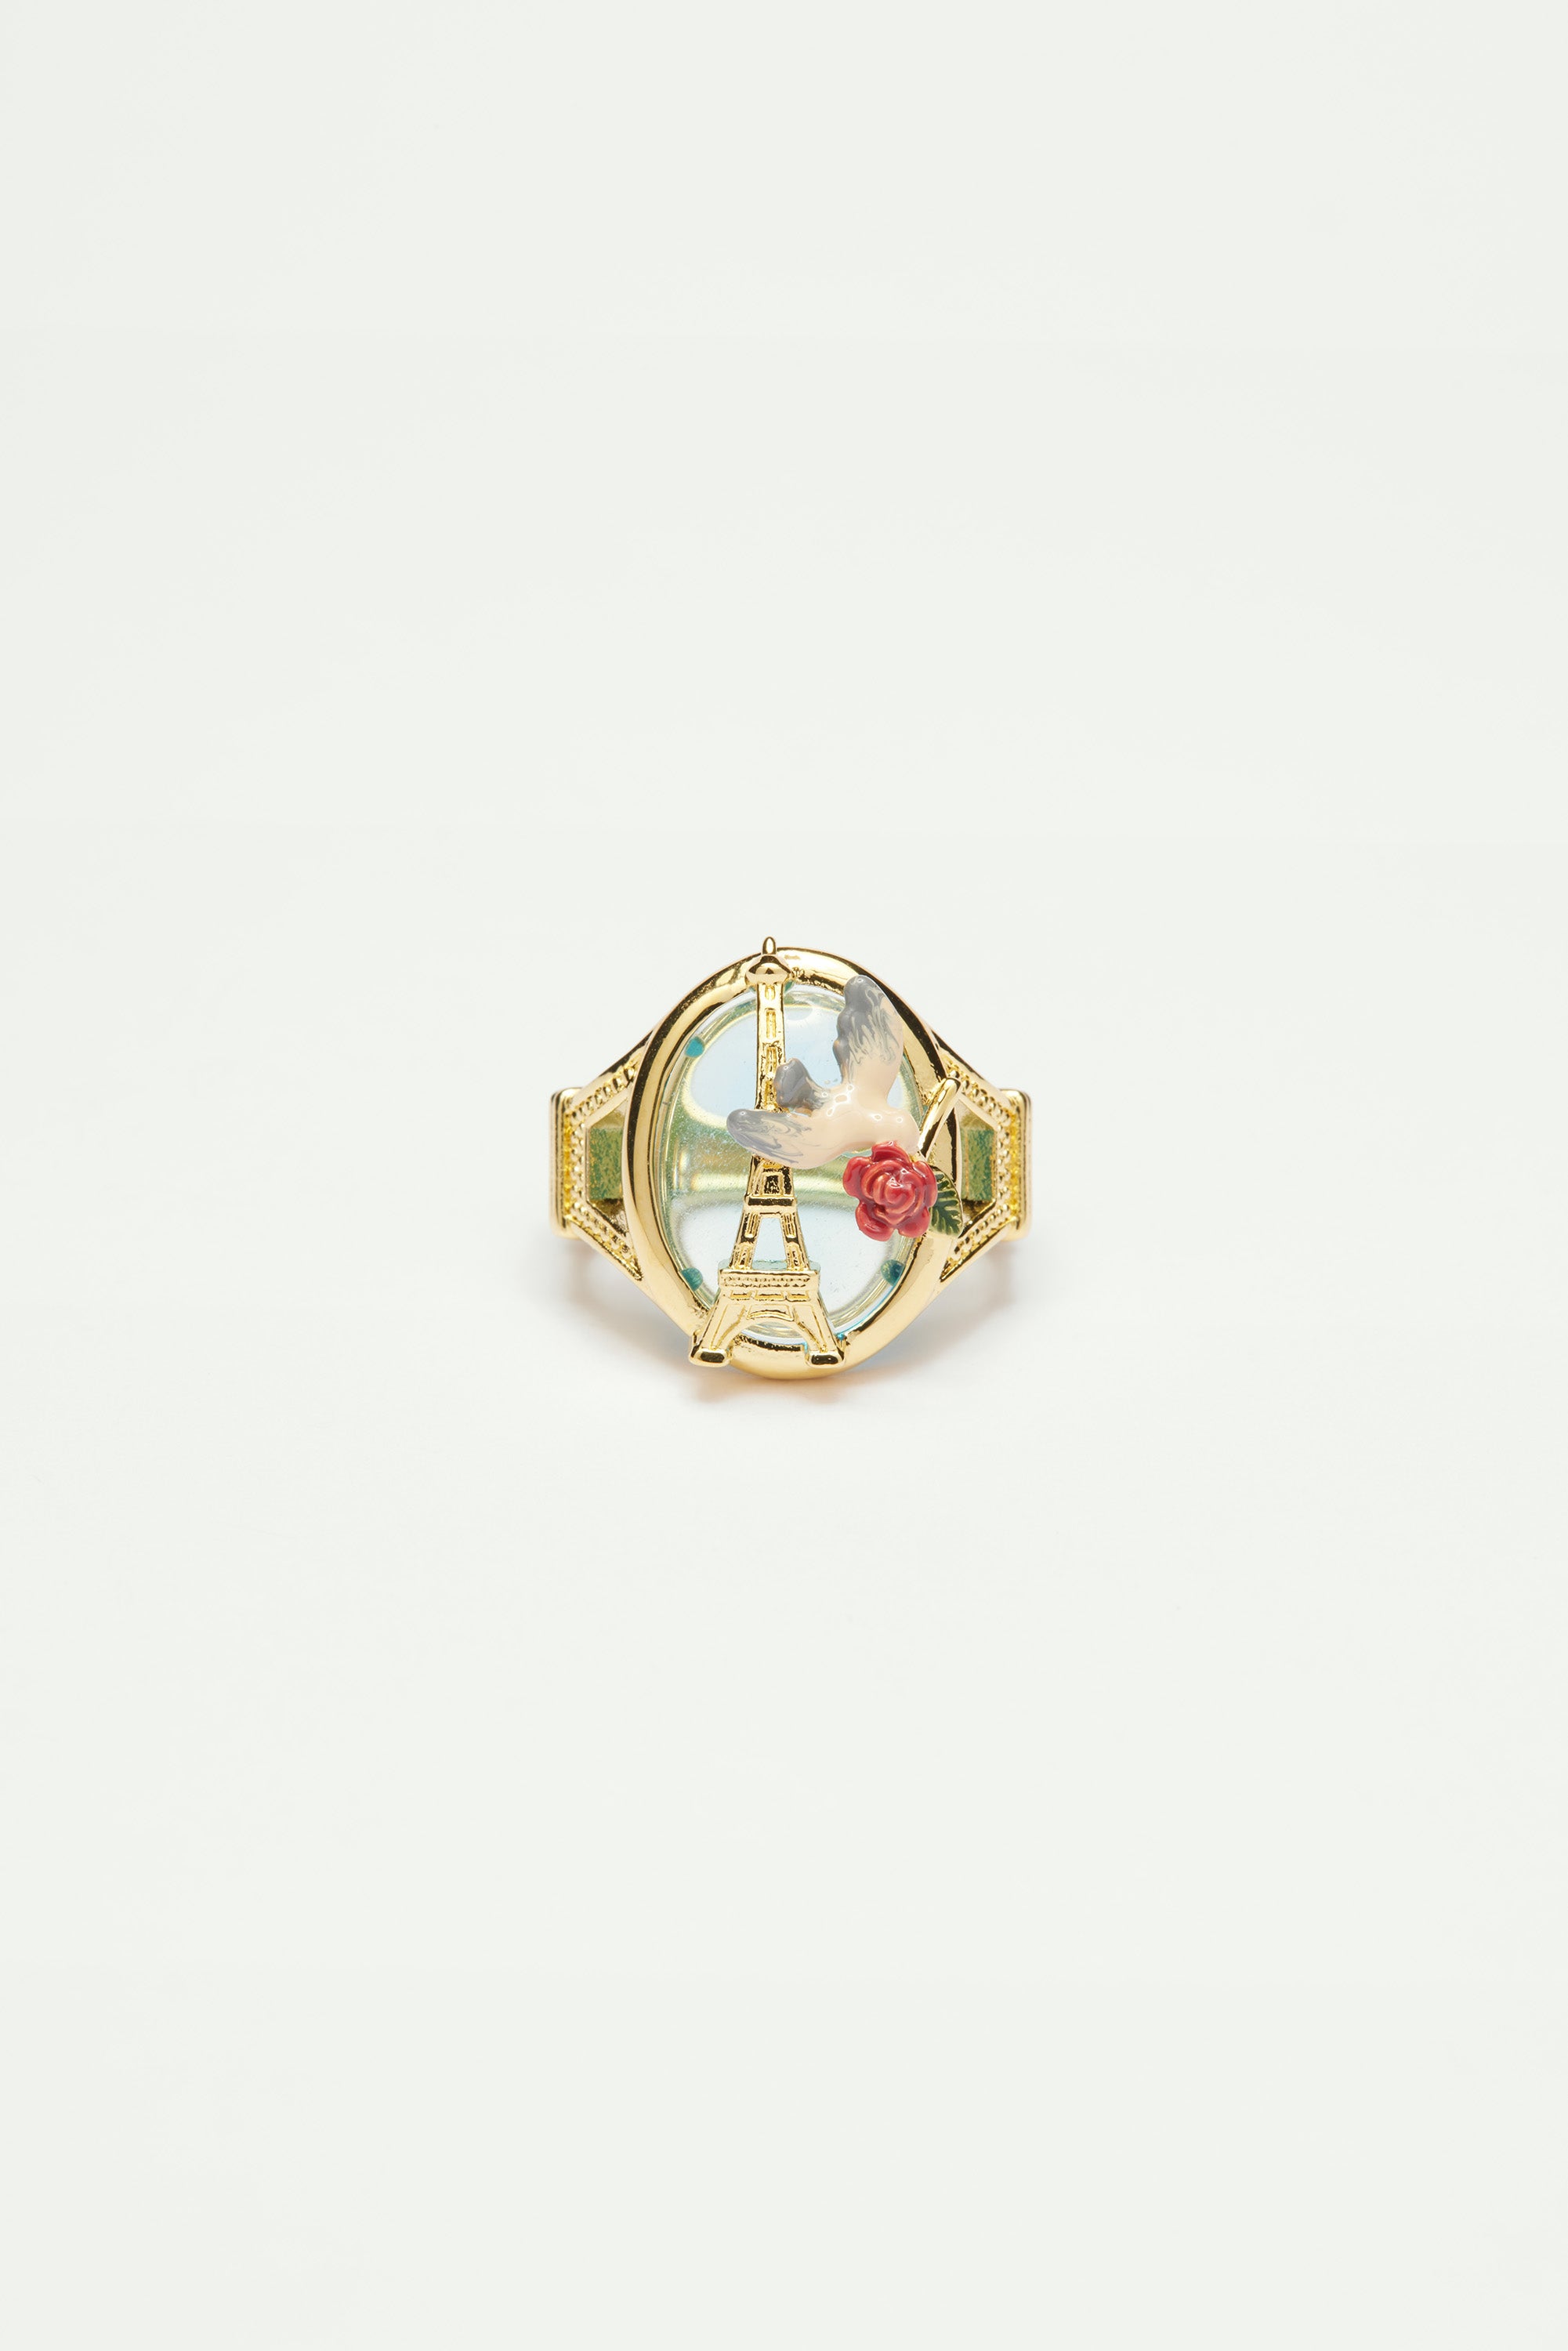 Eiffel tower, sparrow and rose cocktail ring